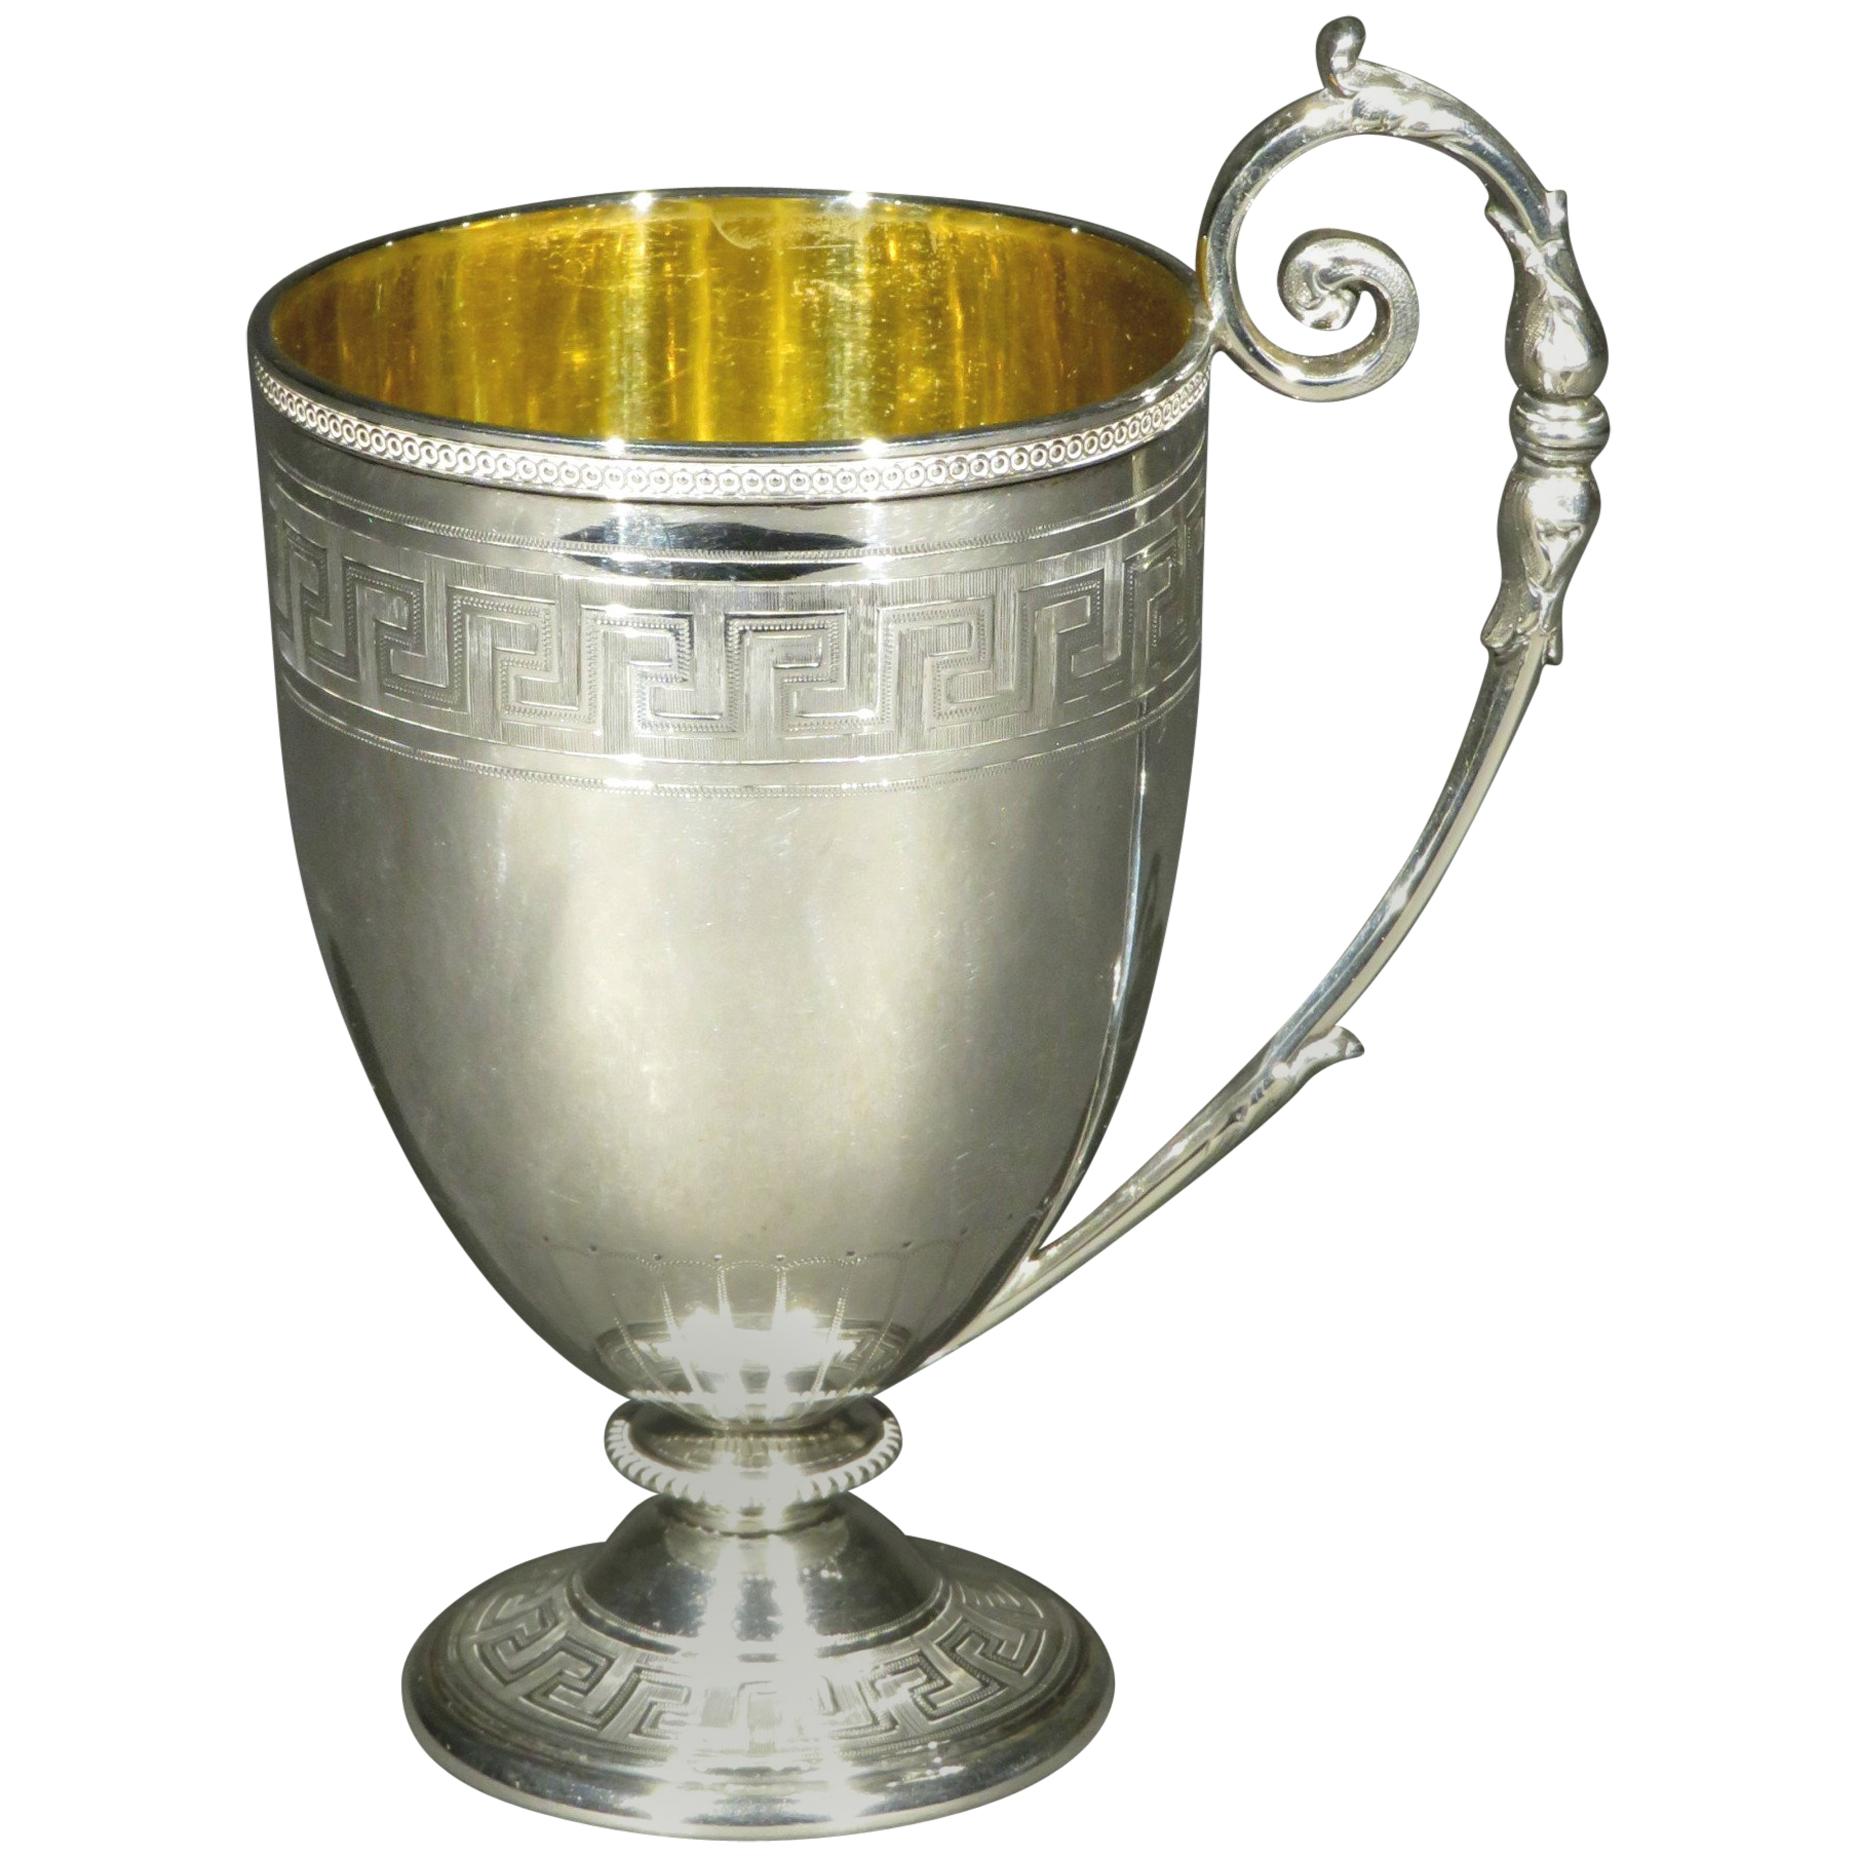 An exceptionally fine sterling silver Christening mug in the neoclassical taste, showing an elegant goblet-shaped bowl decorated with a guilloche beaded rim, over a running band of engraved Greek key motifs. 
The interior exhibiting a richly gilded